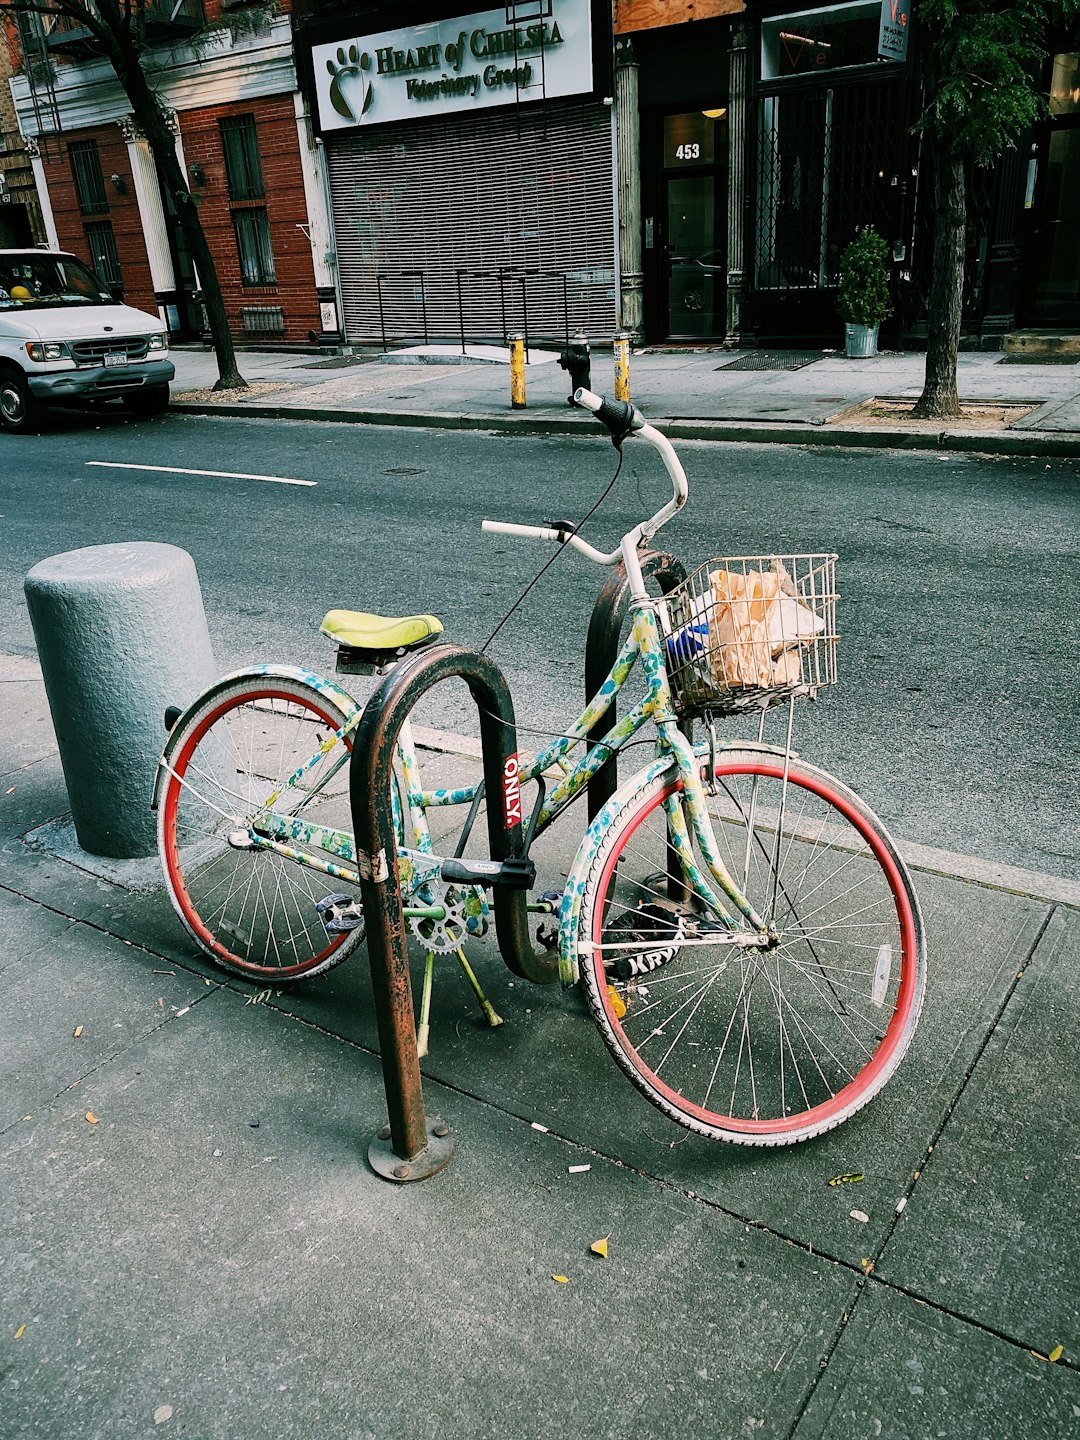 teal bicycle parked